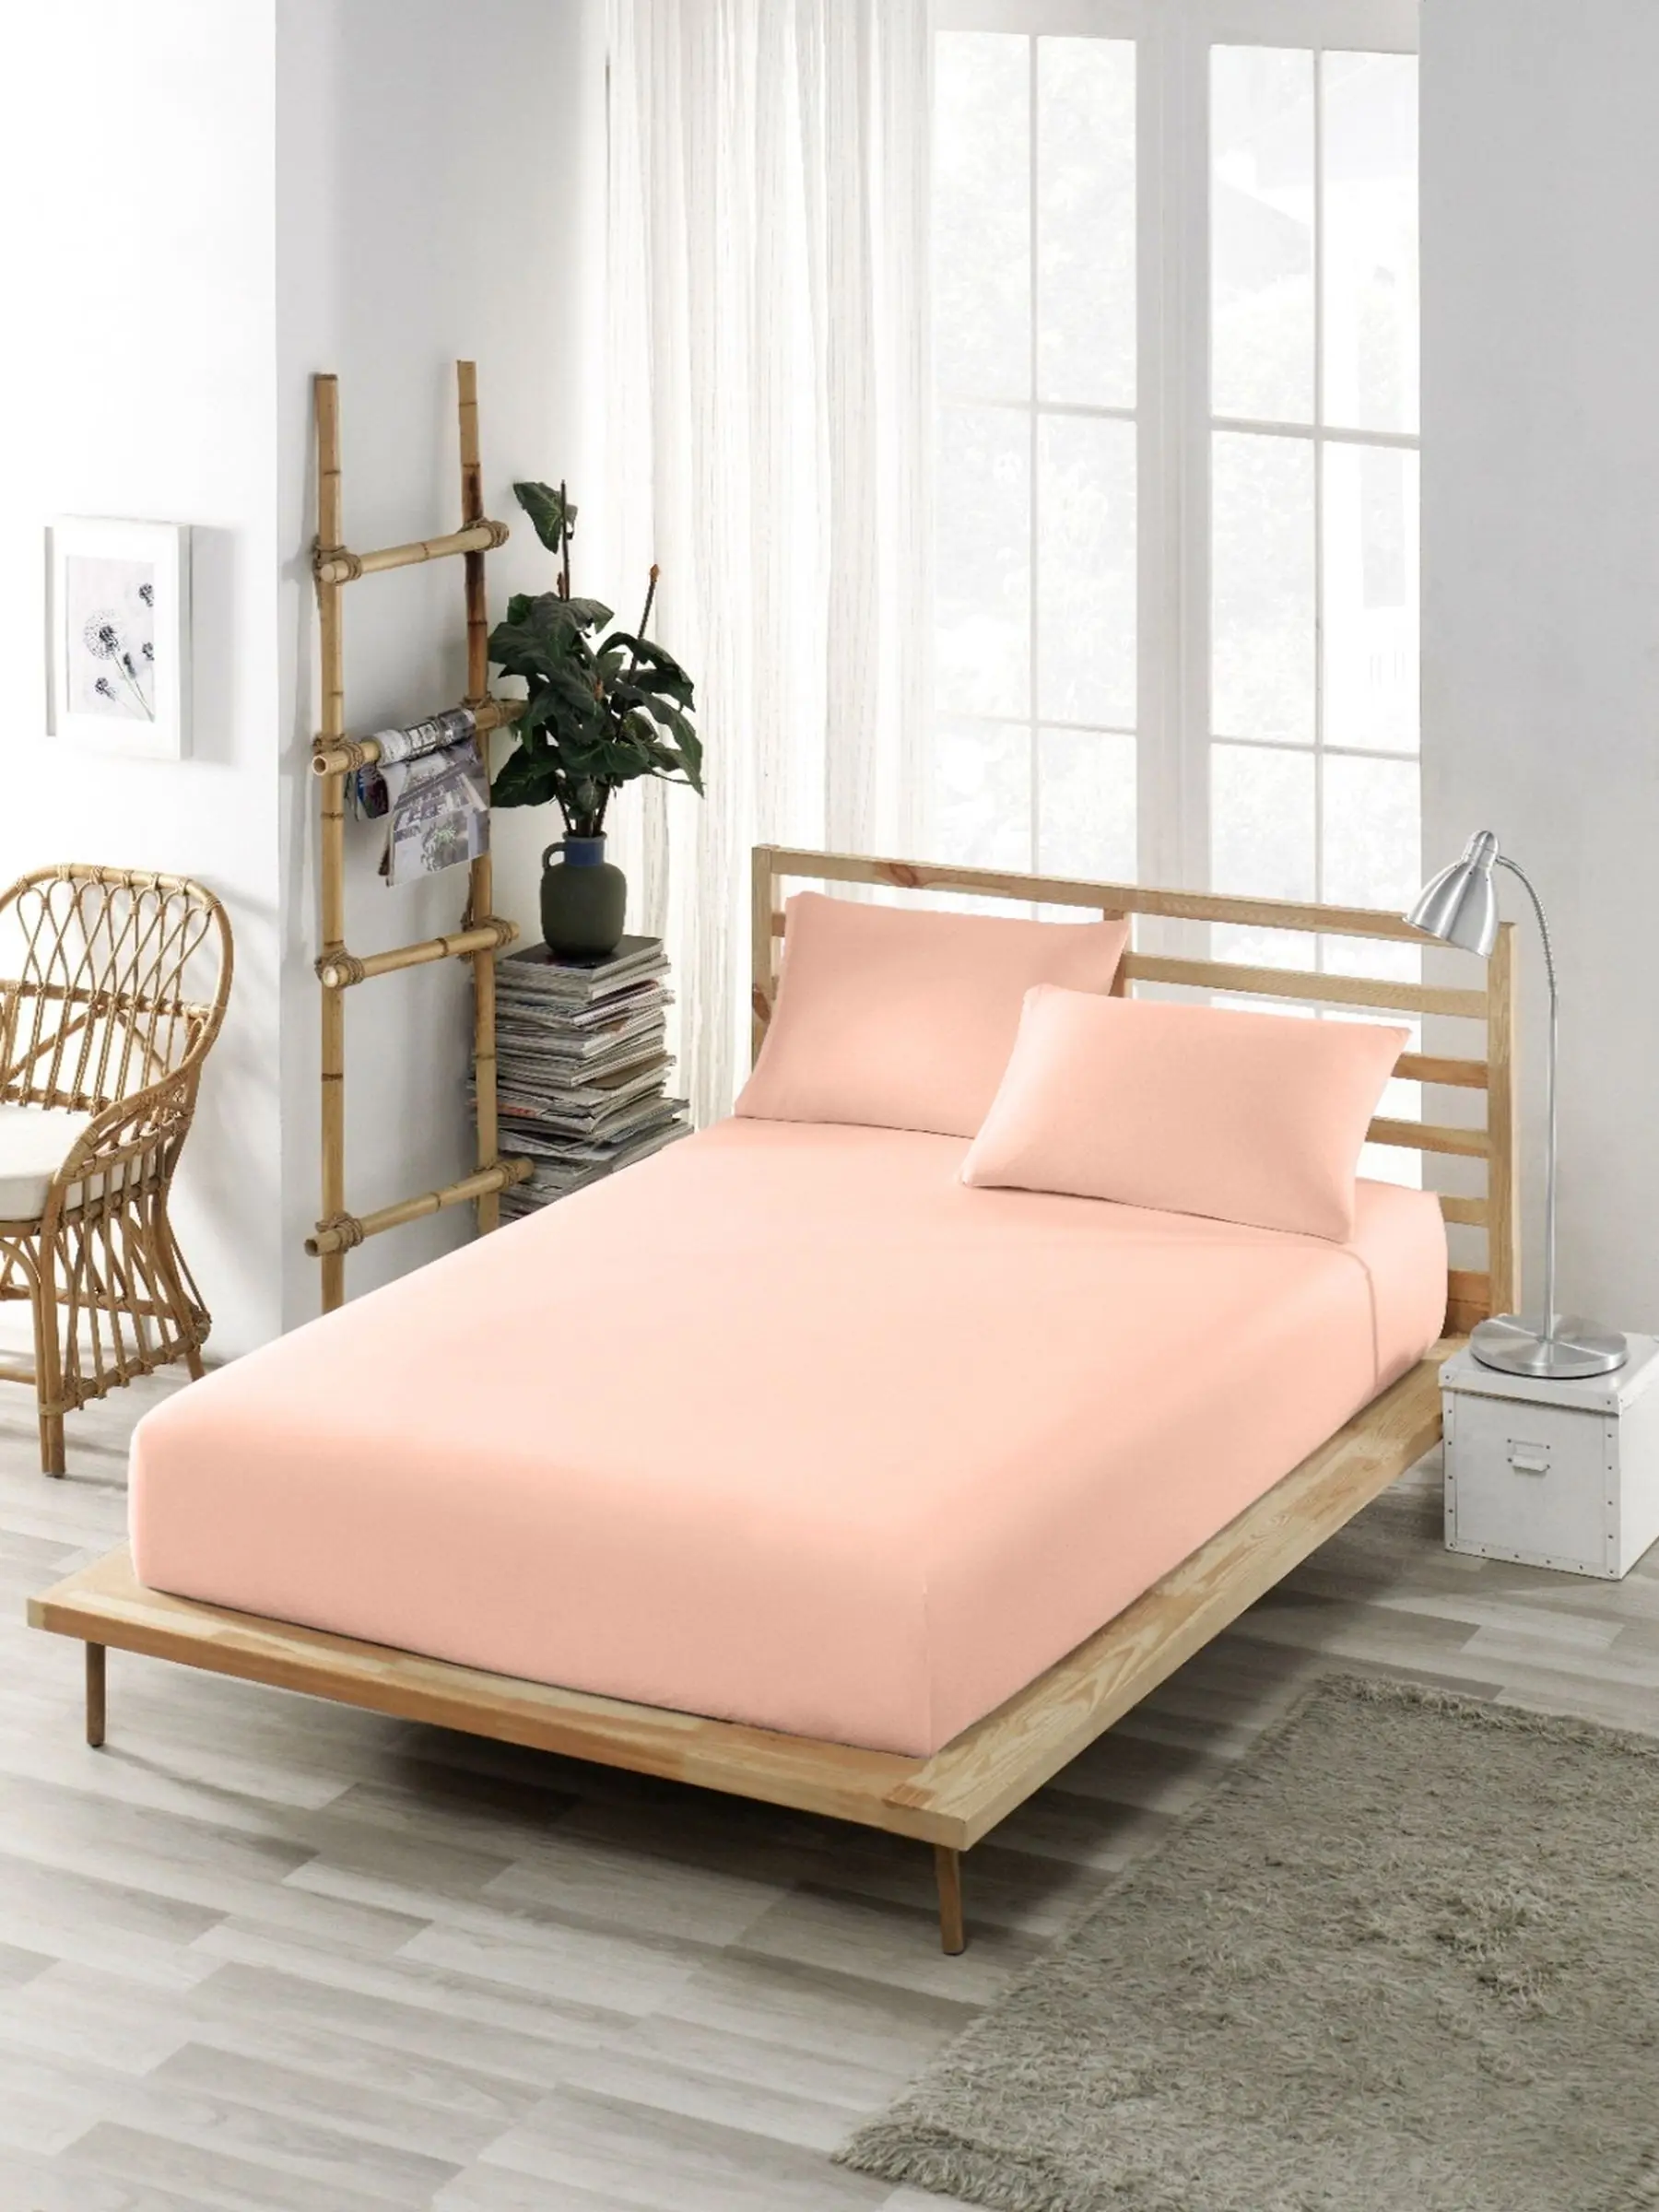 

Bed Sheet (Fitted) (Jersey)-Made in Turkey-Cotton-King Size-Double-Twin-Mattress Cover Soft Pinkish Orange